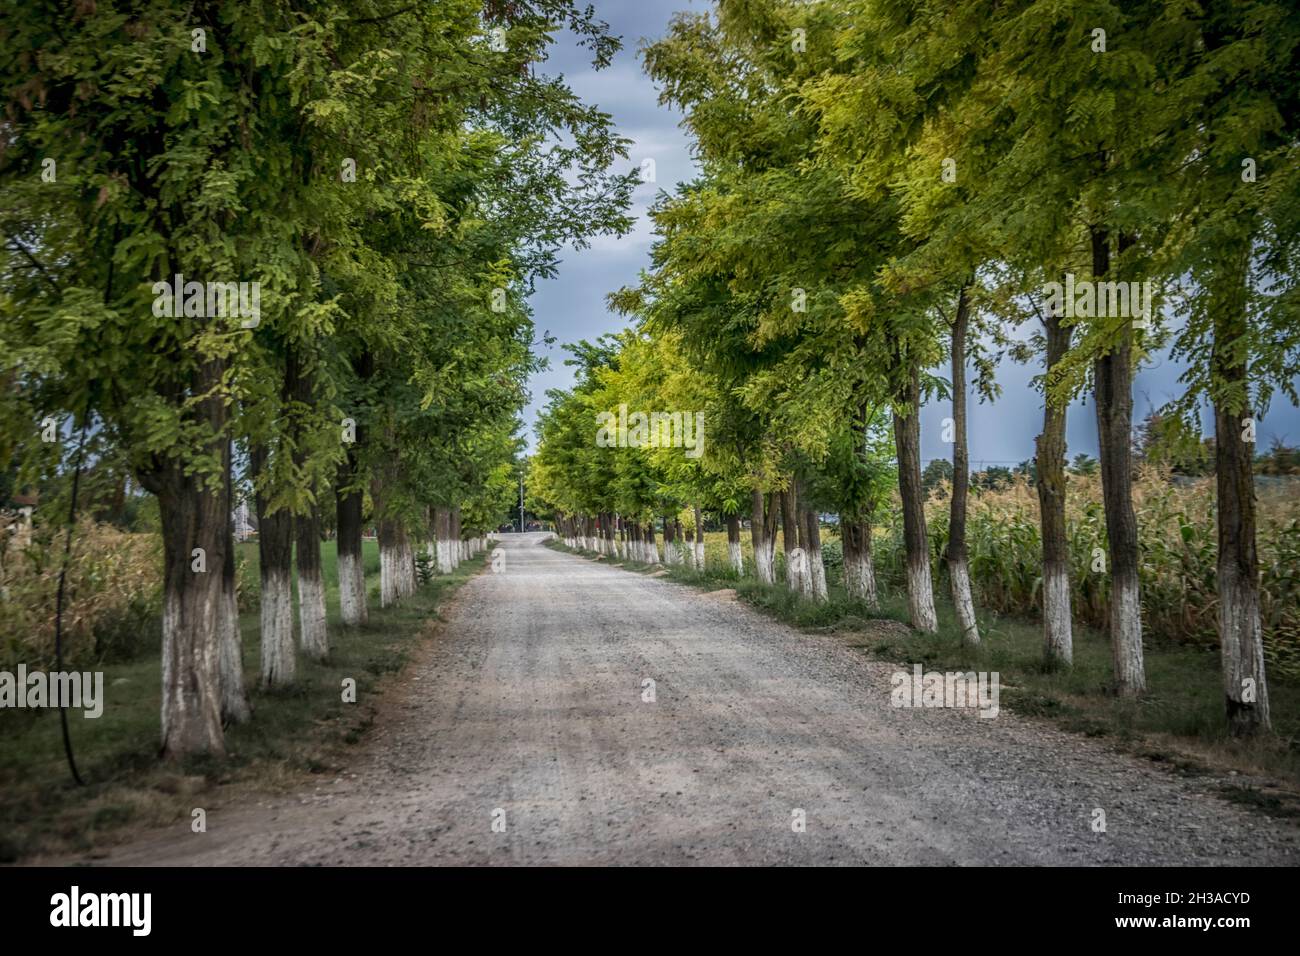 A street lined up by acacia trees in Vojvodina in Serbia Stock Photo